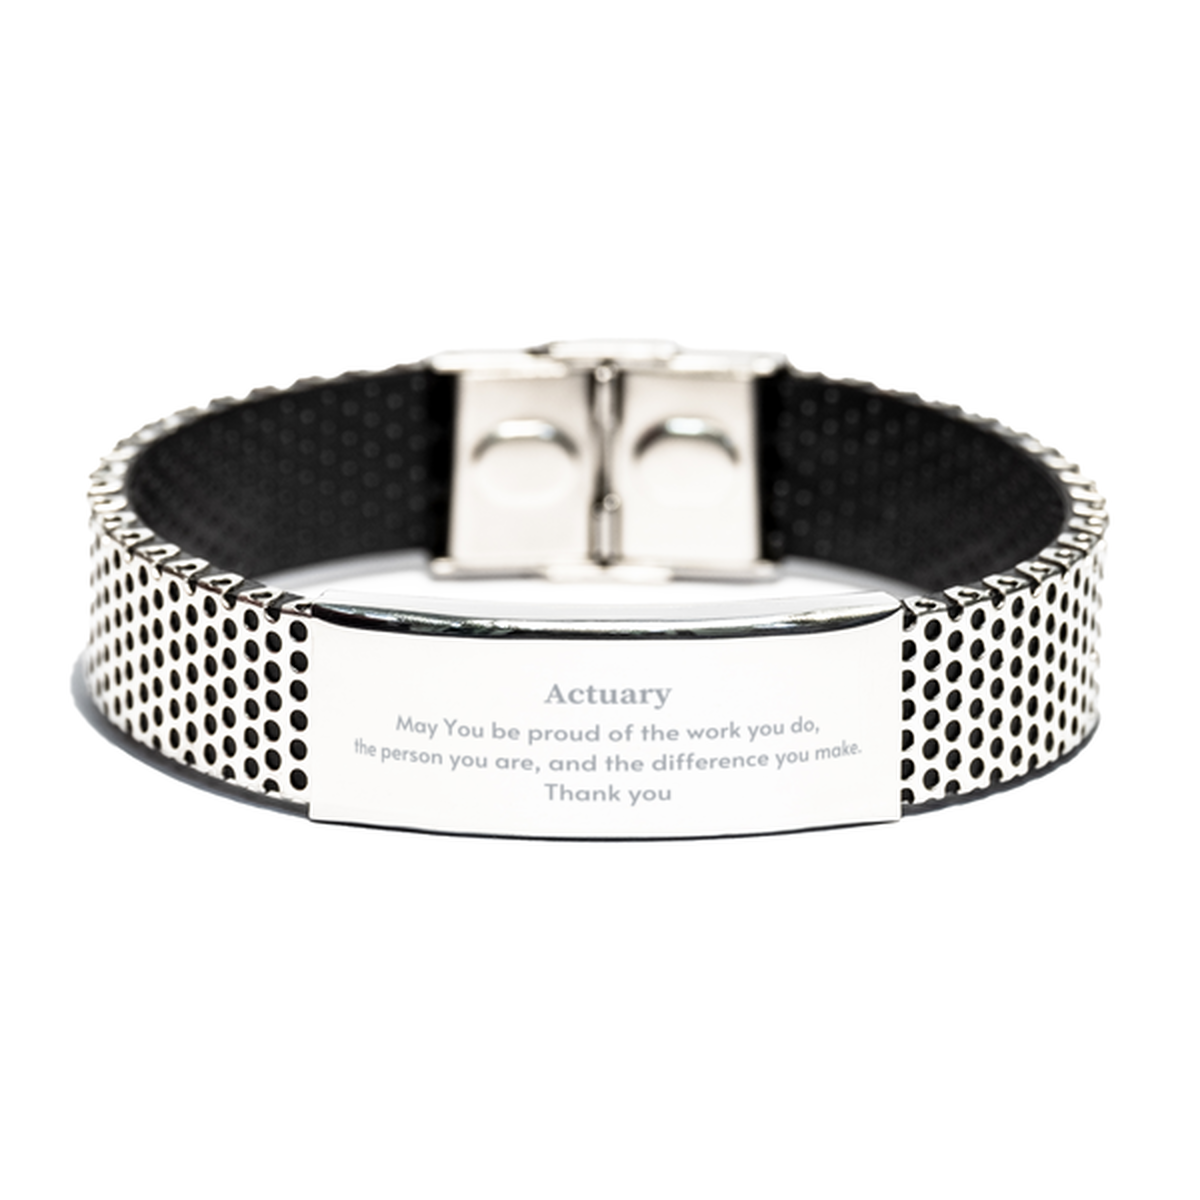 Heartwarming Stainless Steel Bracelet Retirement Coworkers Gifts for Actuary, Actuary May You be proud of the work you do, the person you are Gifts for Boss Men Women Friends